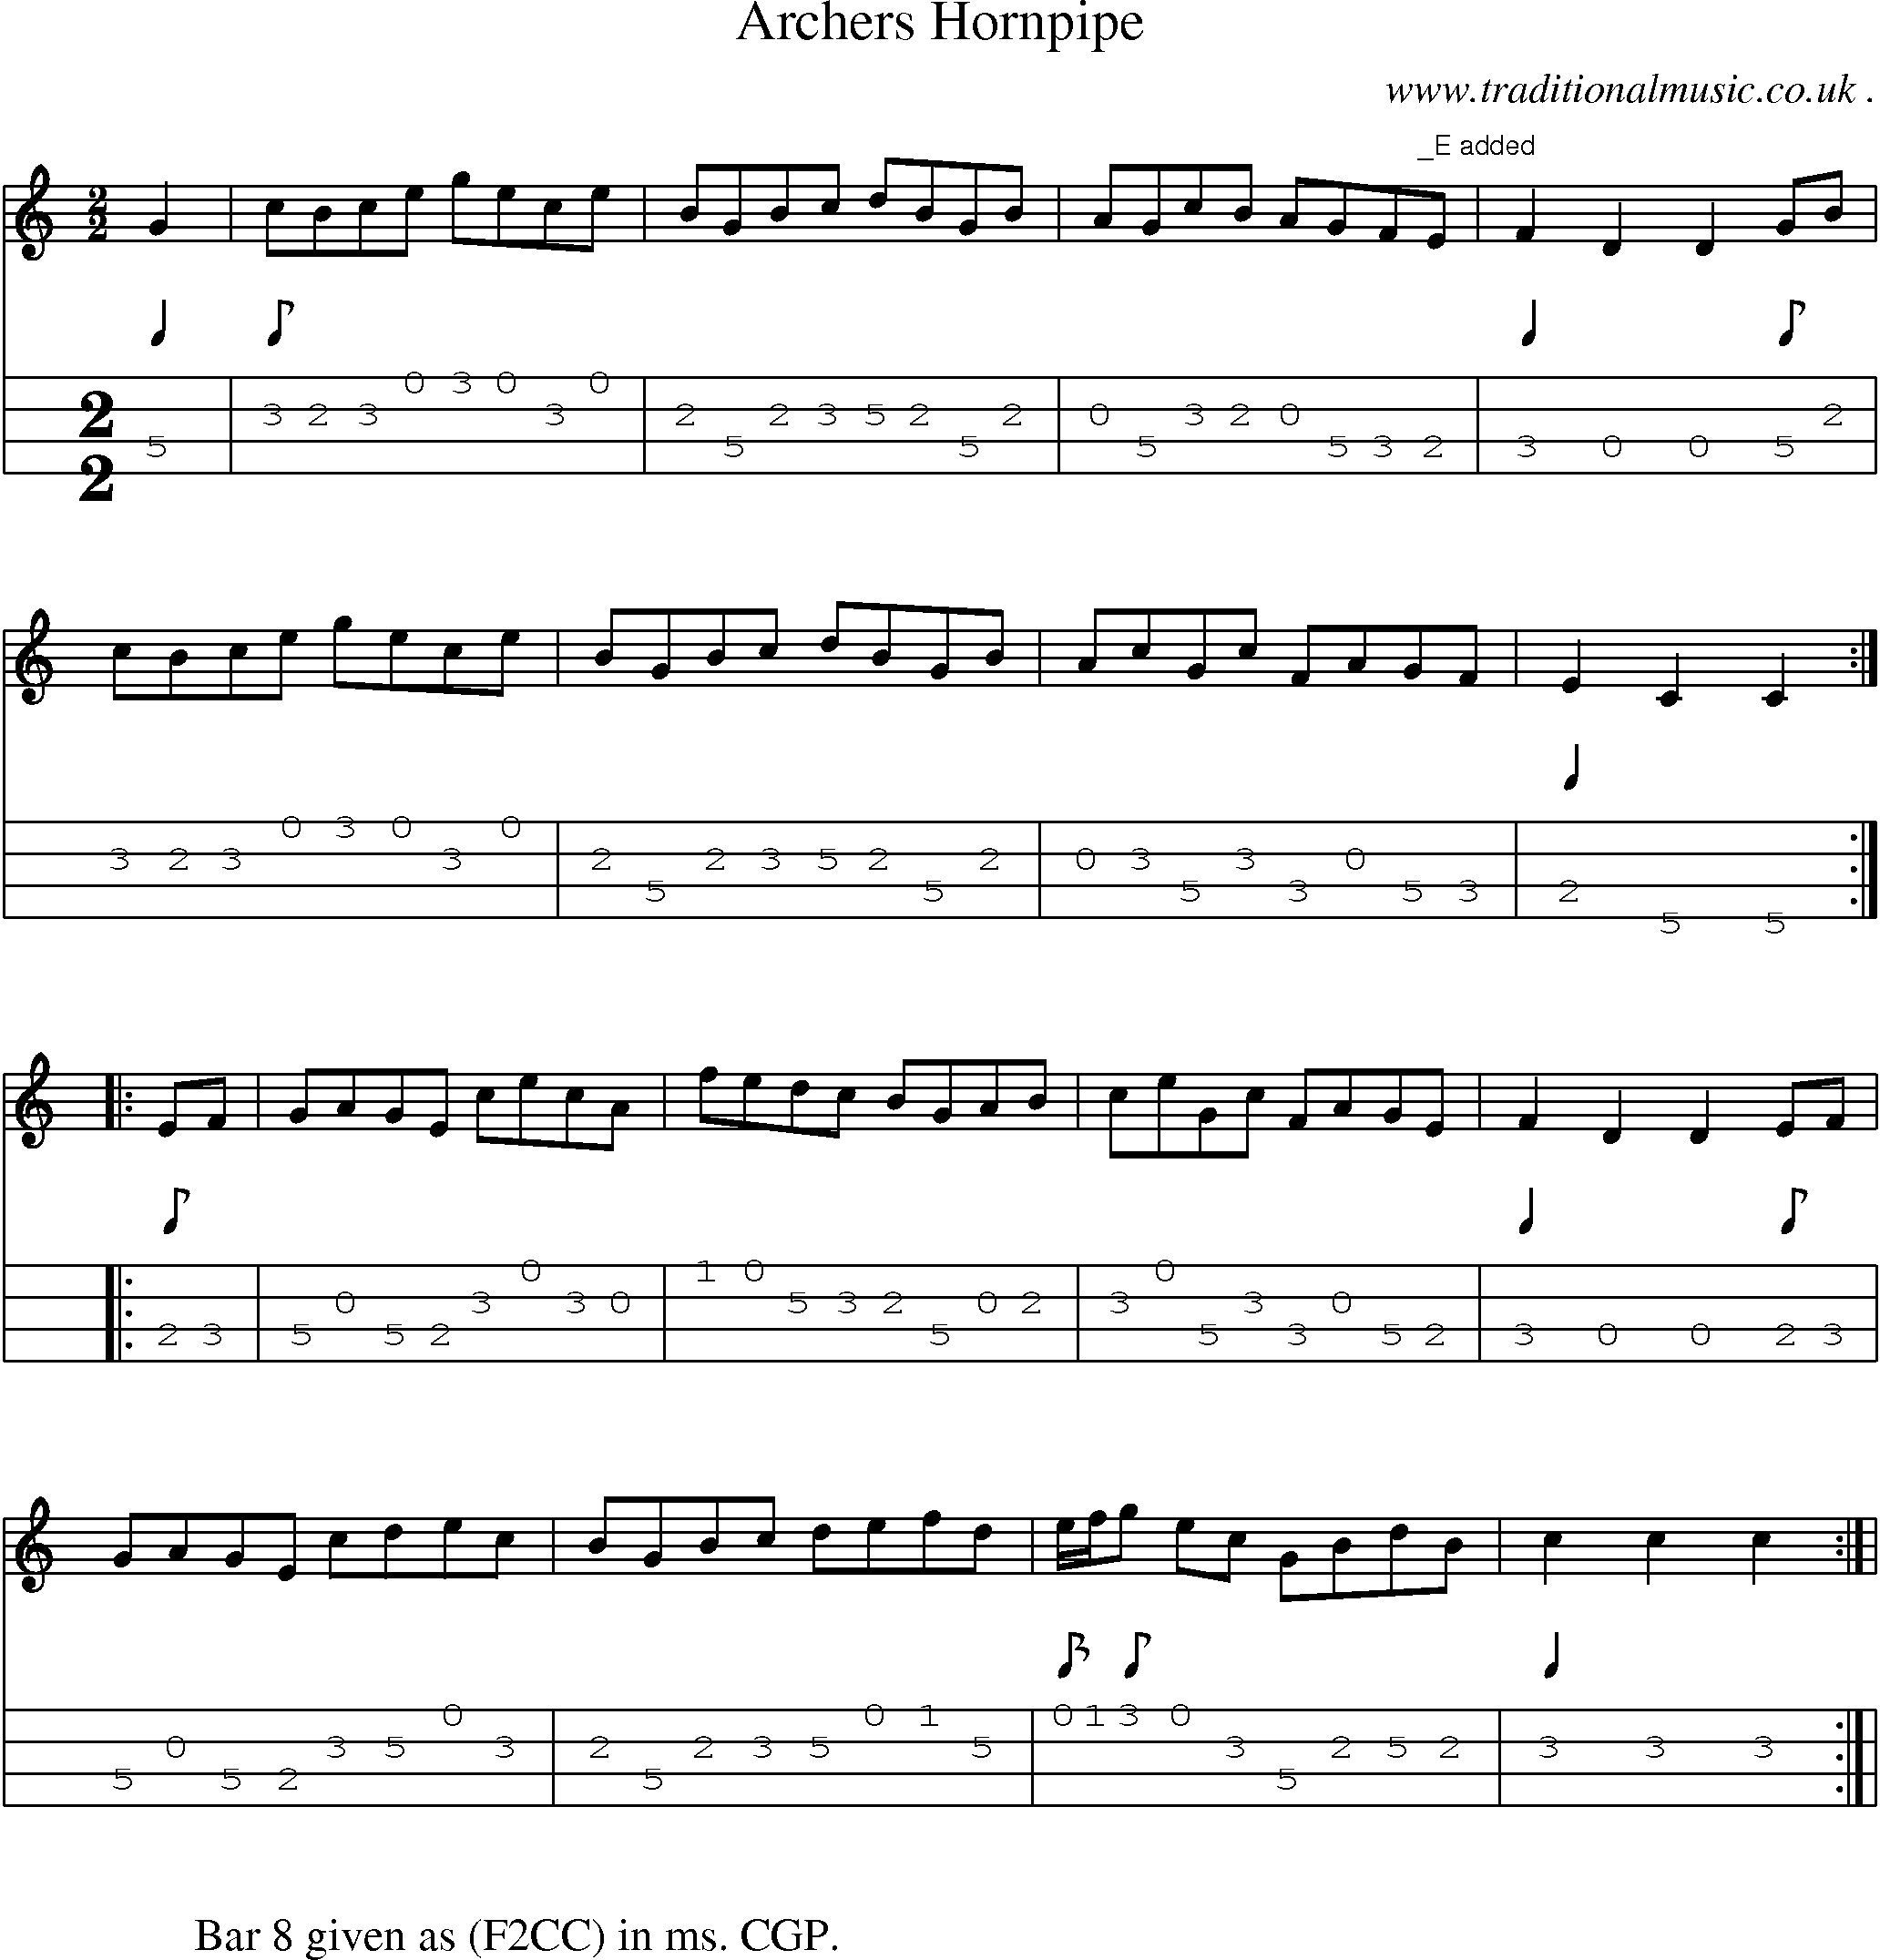 Sheet-Music and Mandolin Tabs for Archers Hornpipe